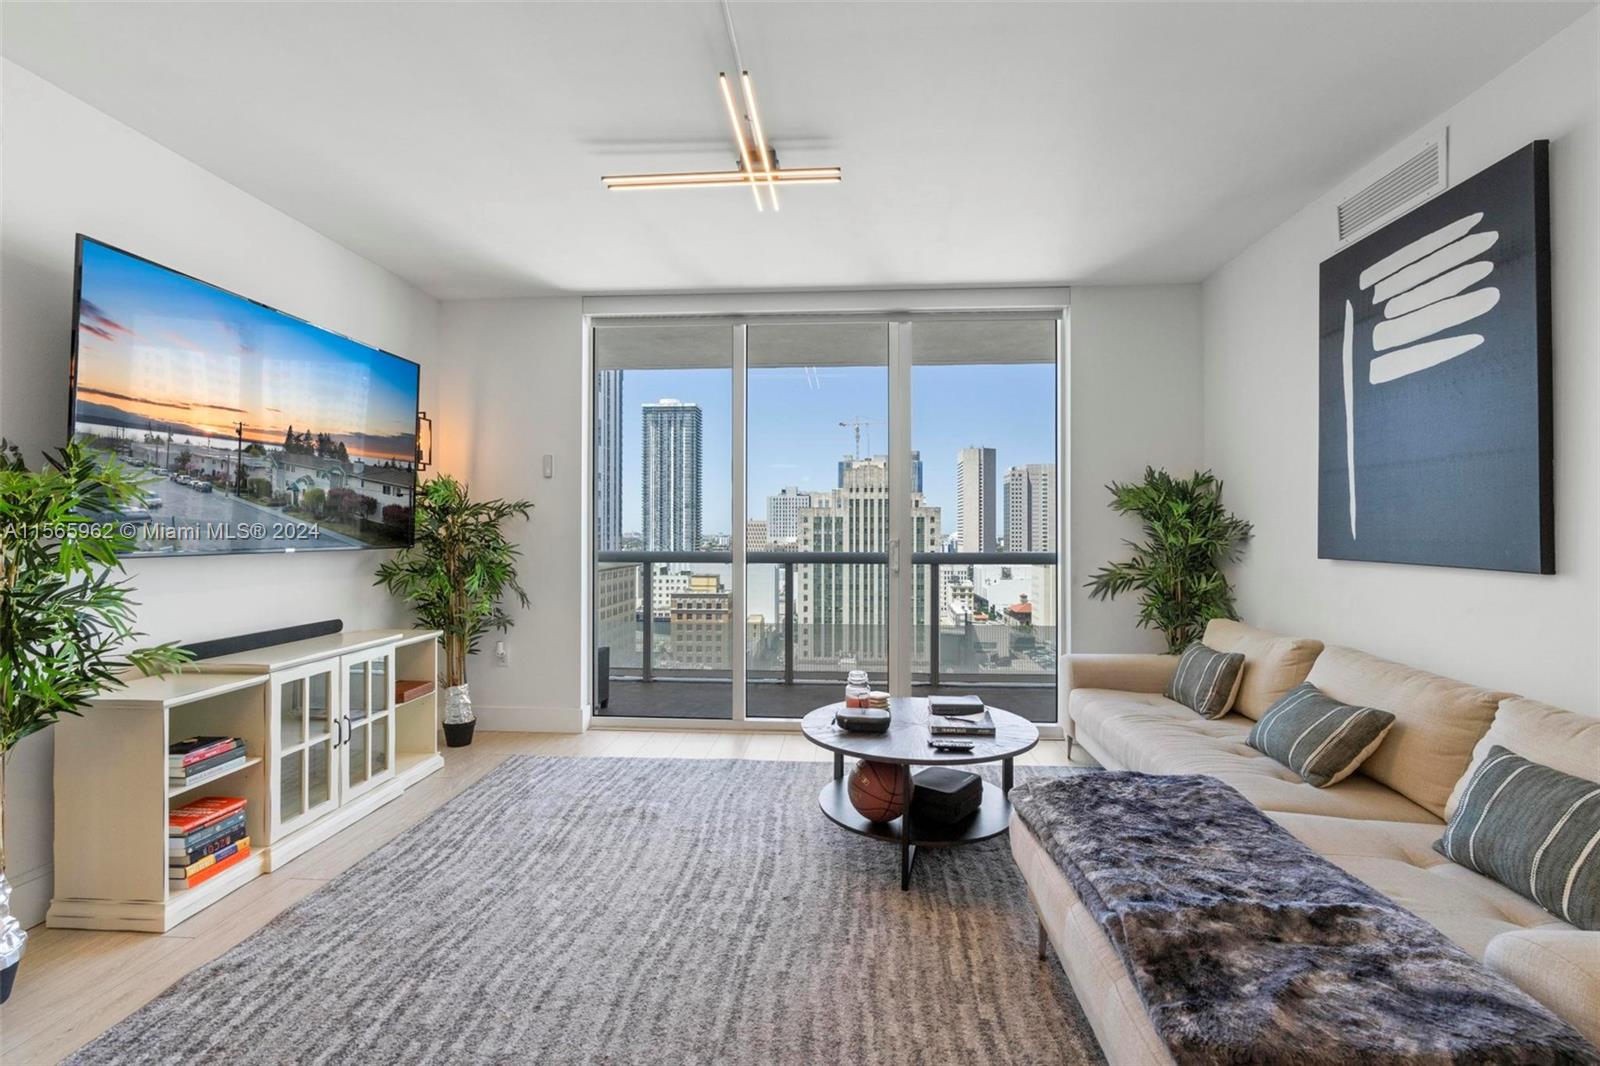 Beautifully Remodeled 2 bed / 2 bath unit with spectacular bay and city views. Wraparound balcony. First class amenities including 24-hr concierge, state of the art center spa, sauna, infinity pool, valet parking & more! 50 Biscayne is located in the heart of downtown next to the best entertainment, restaurants, and activities the city has to offer. Condo has reserves.